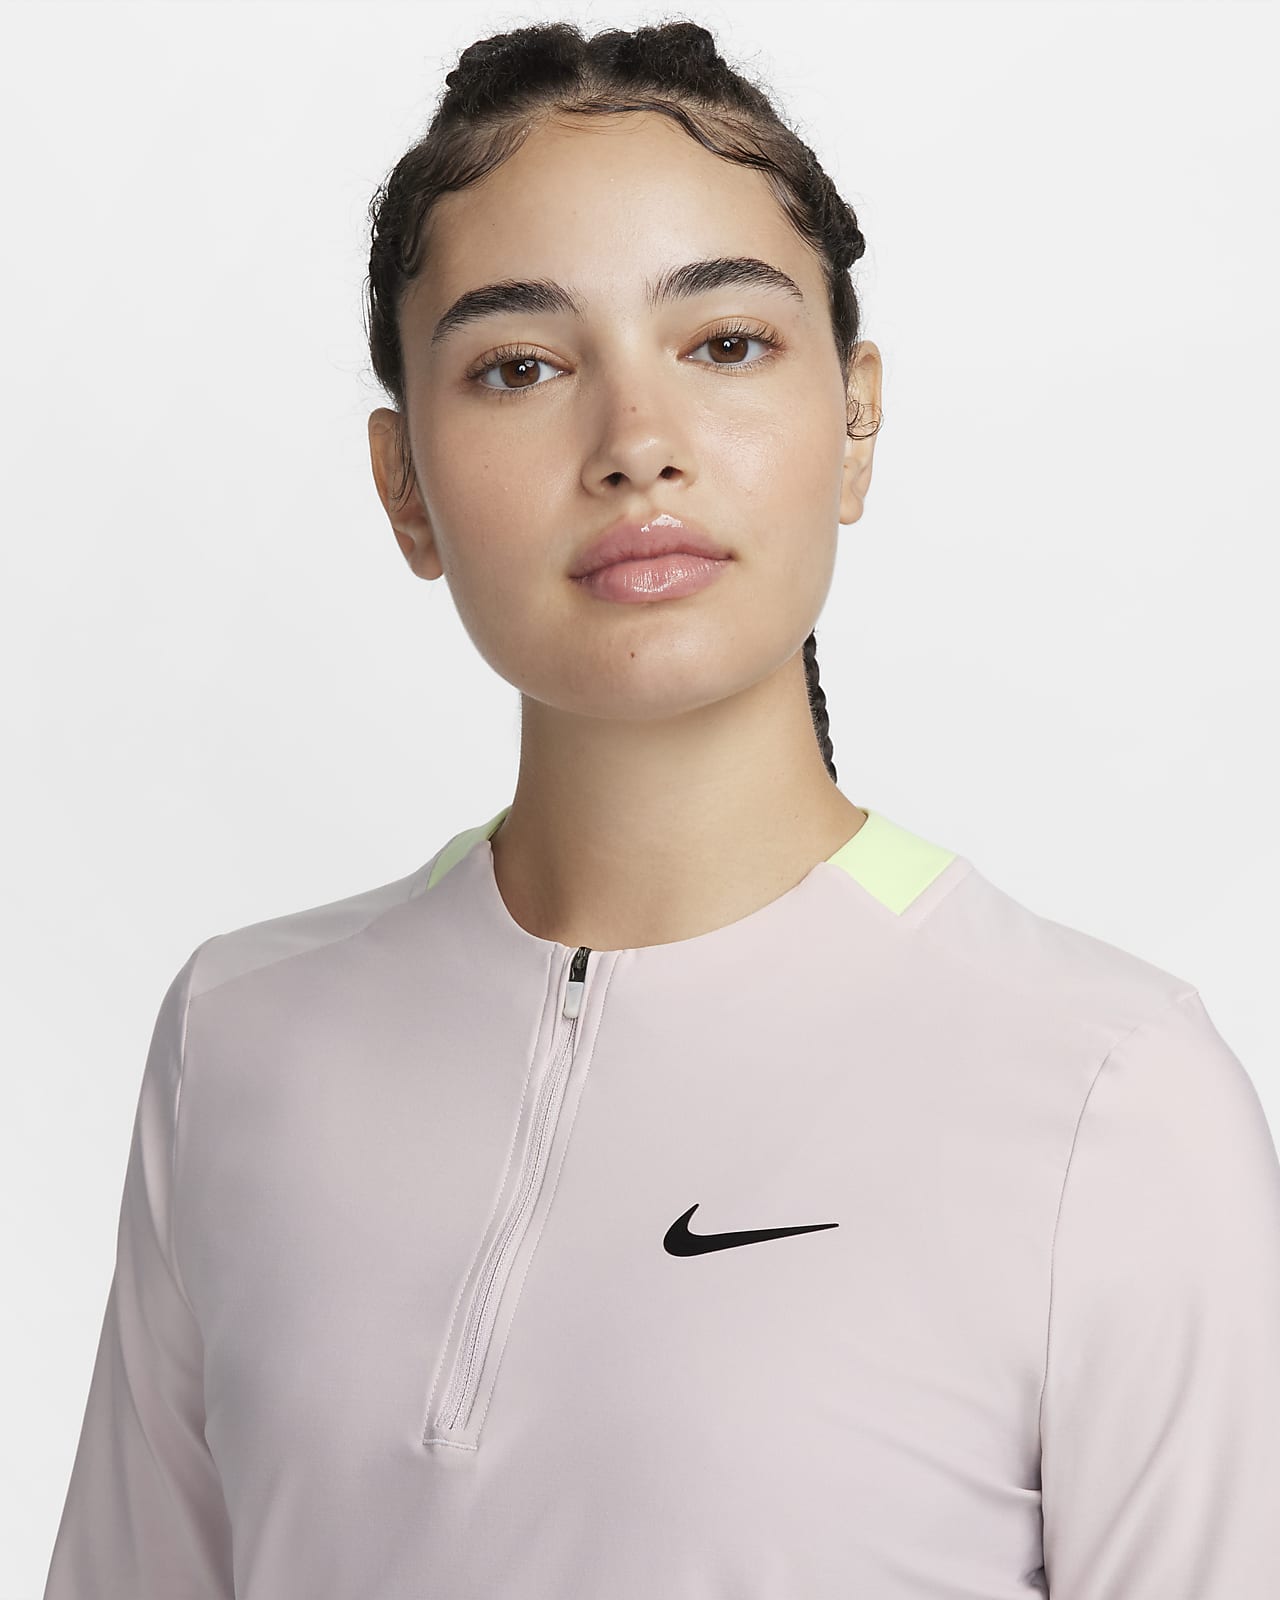 Women's trousers Nike Court Tennis Pant NY - pink foil/hot  lime/white/sapphire, Tennis Zone